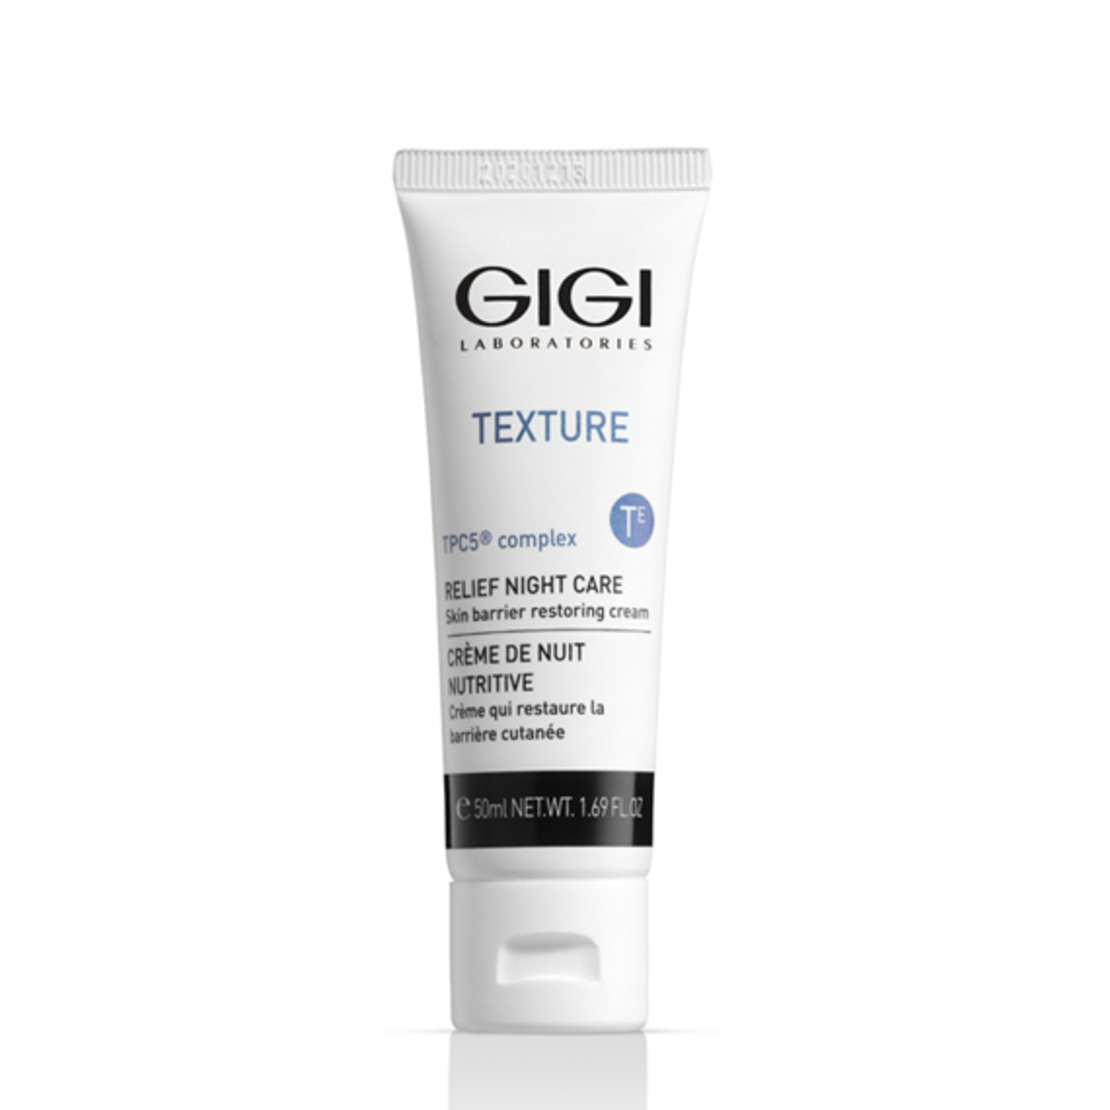 TEXTURE - RELIEF NIGHT CARE